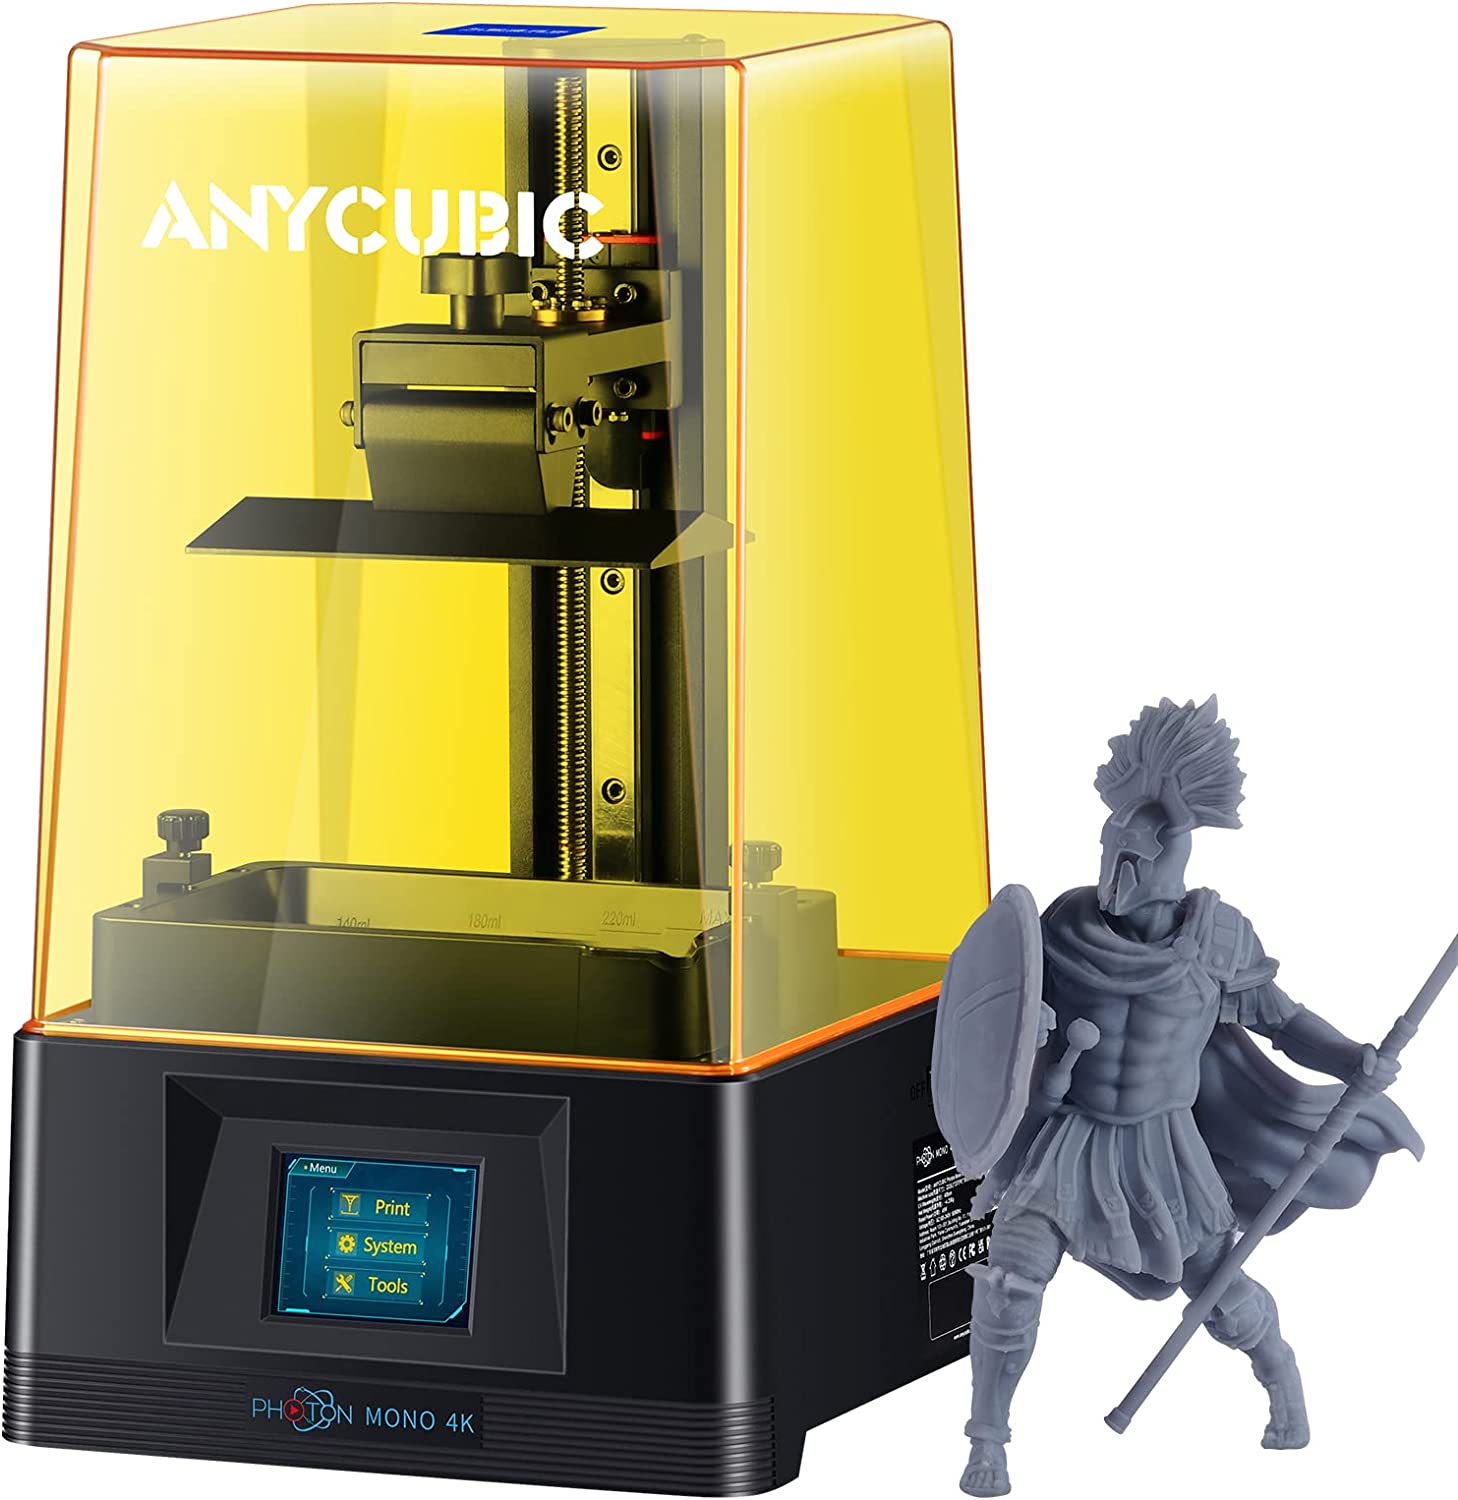 Anycubic 3D Printing Painting Kit - The Ultimate All-in-One